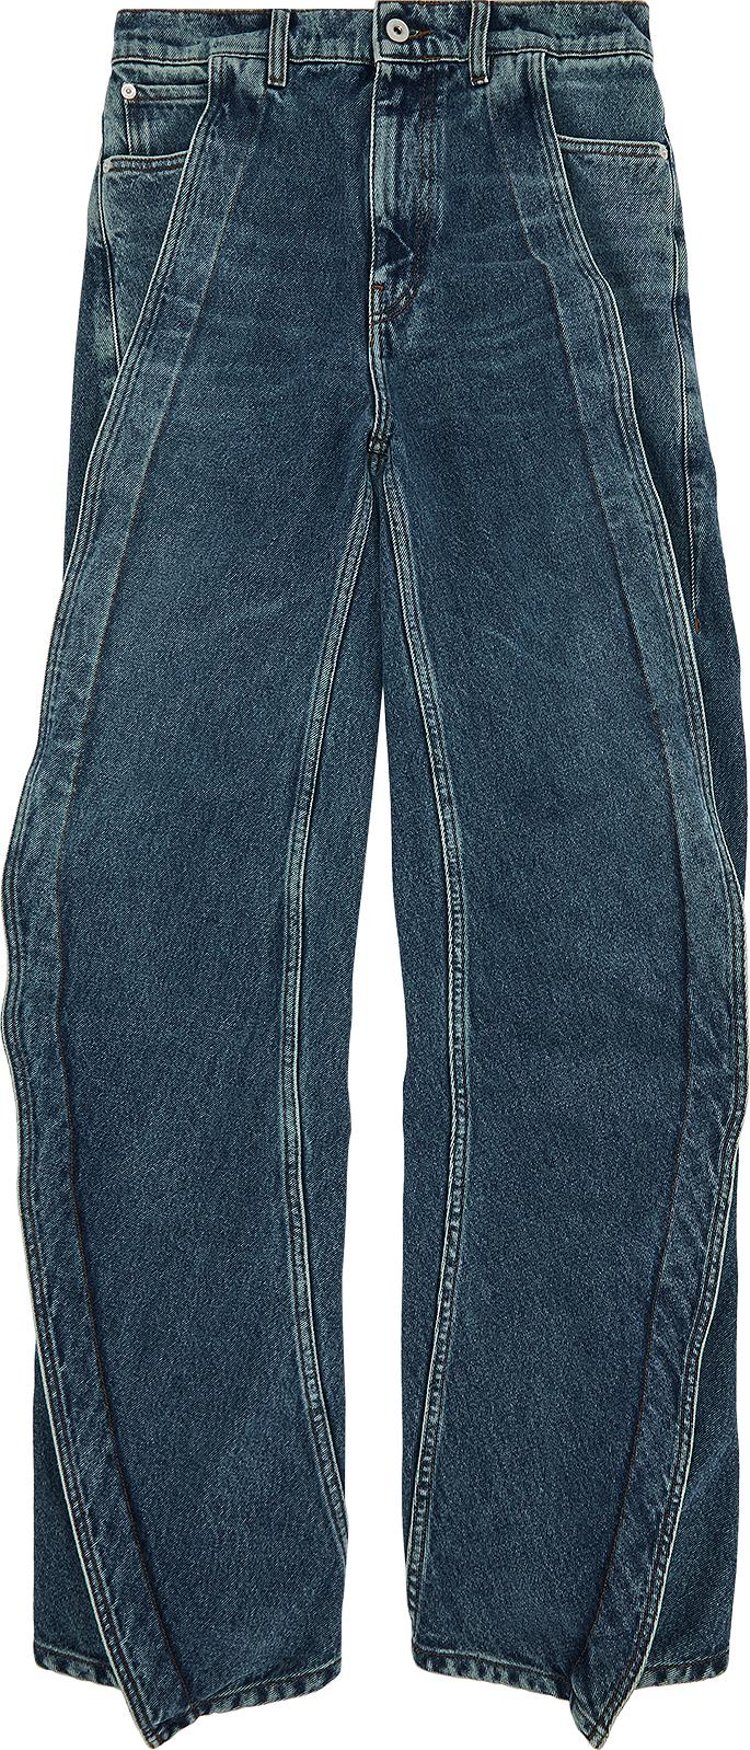 Y/Project Evergreen Banana Jeans 'Vintage Blue'